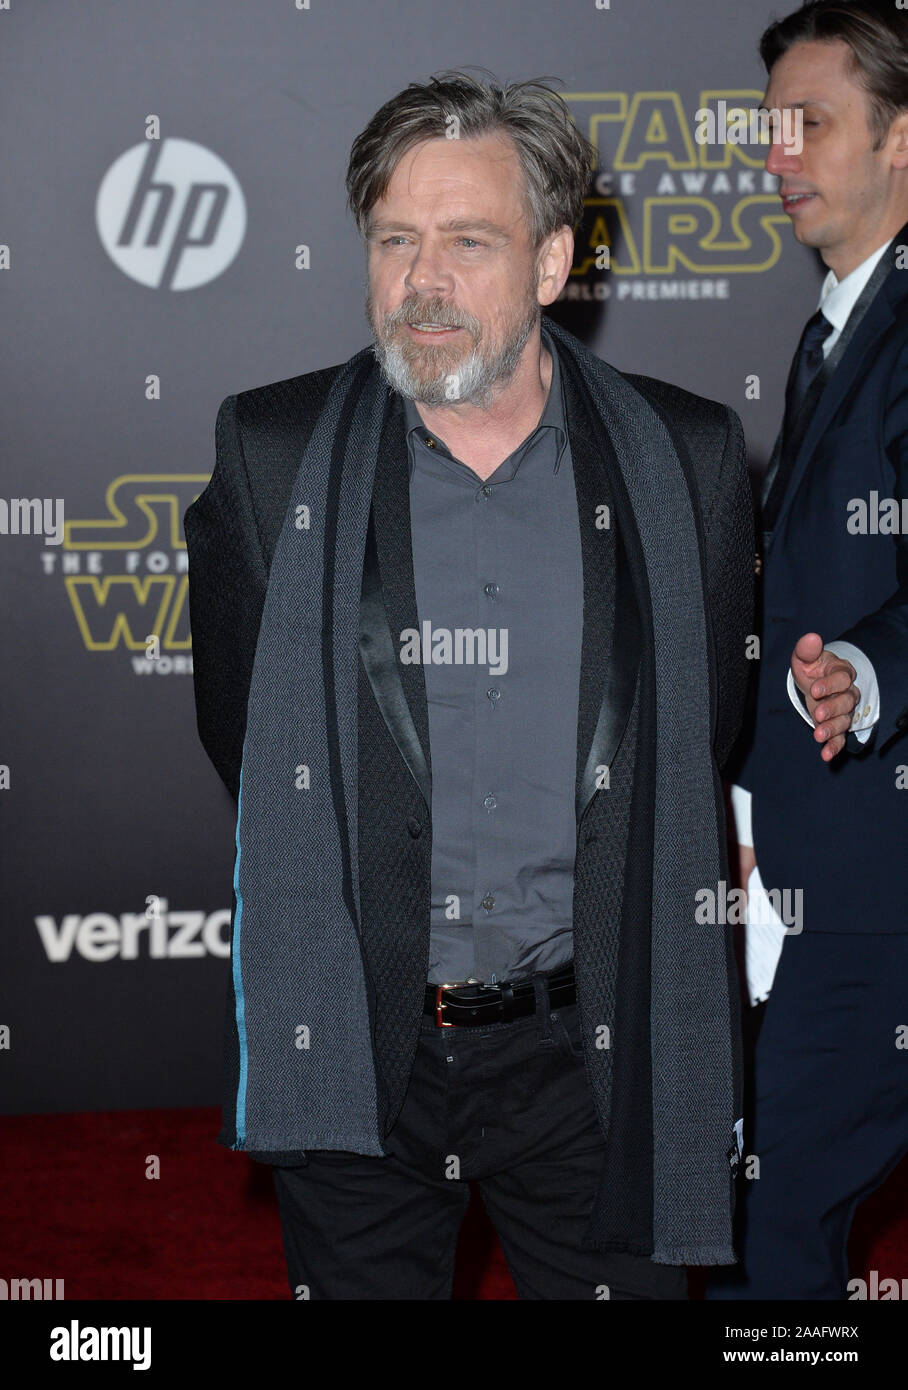 LOS ANGELES, CA - DECEMBER 14, 2015: Actor Mark Hamill at the world  premiere of Star Wars: The Force Awakens on Hollywood Boulevard © 2015  Paul Smith / Featureflash Stock Photo - Alamy